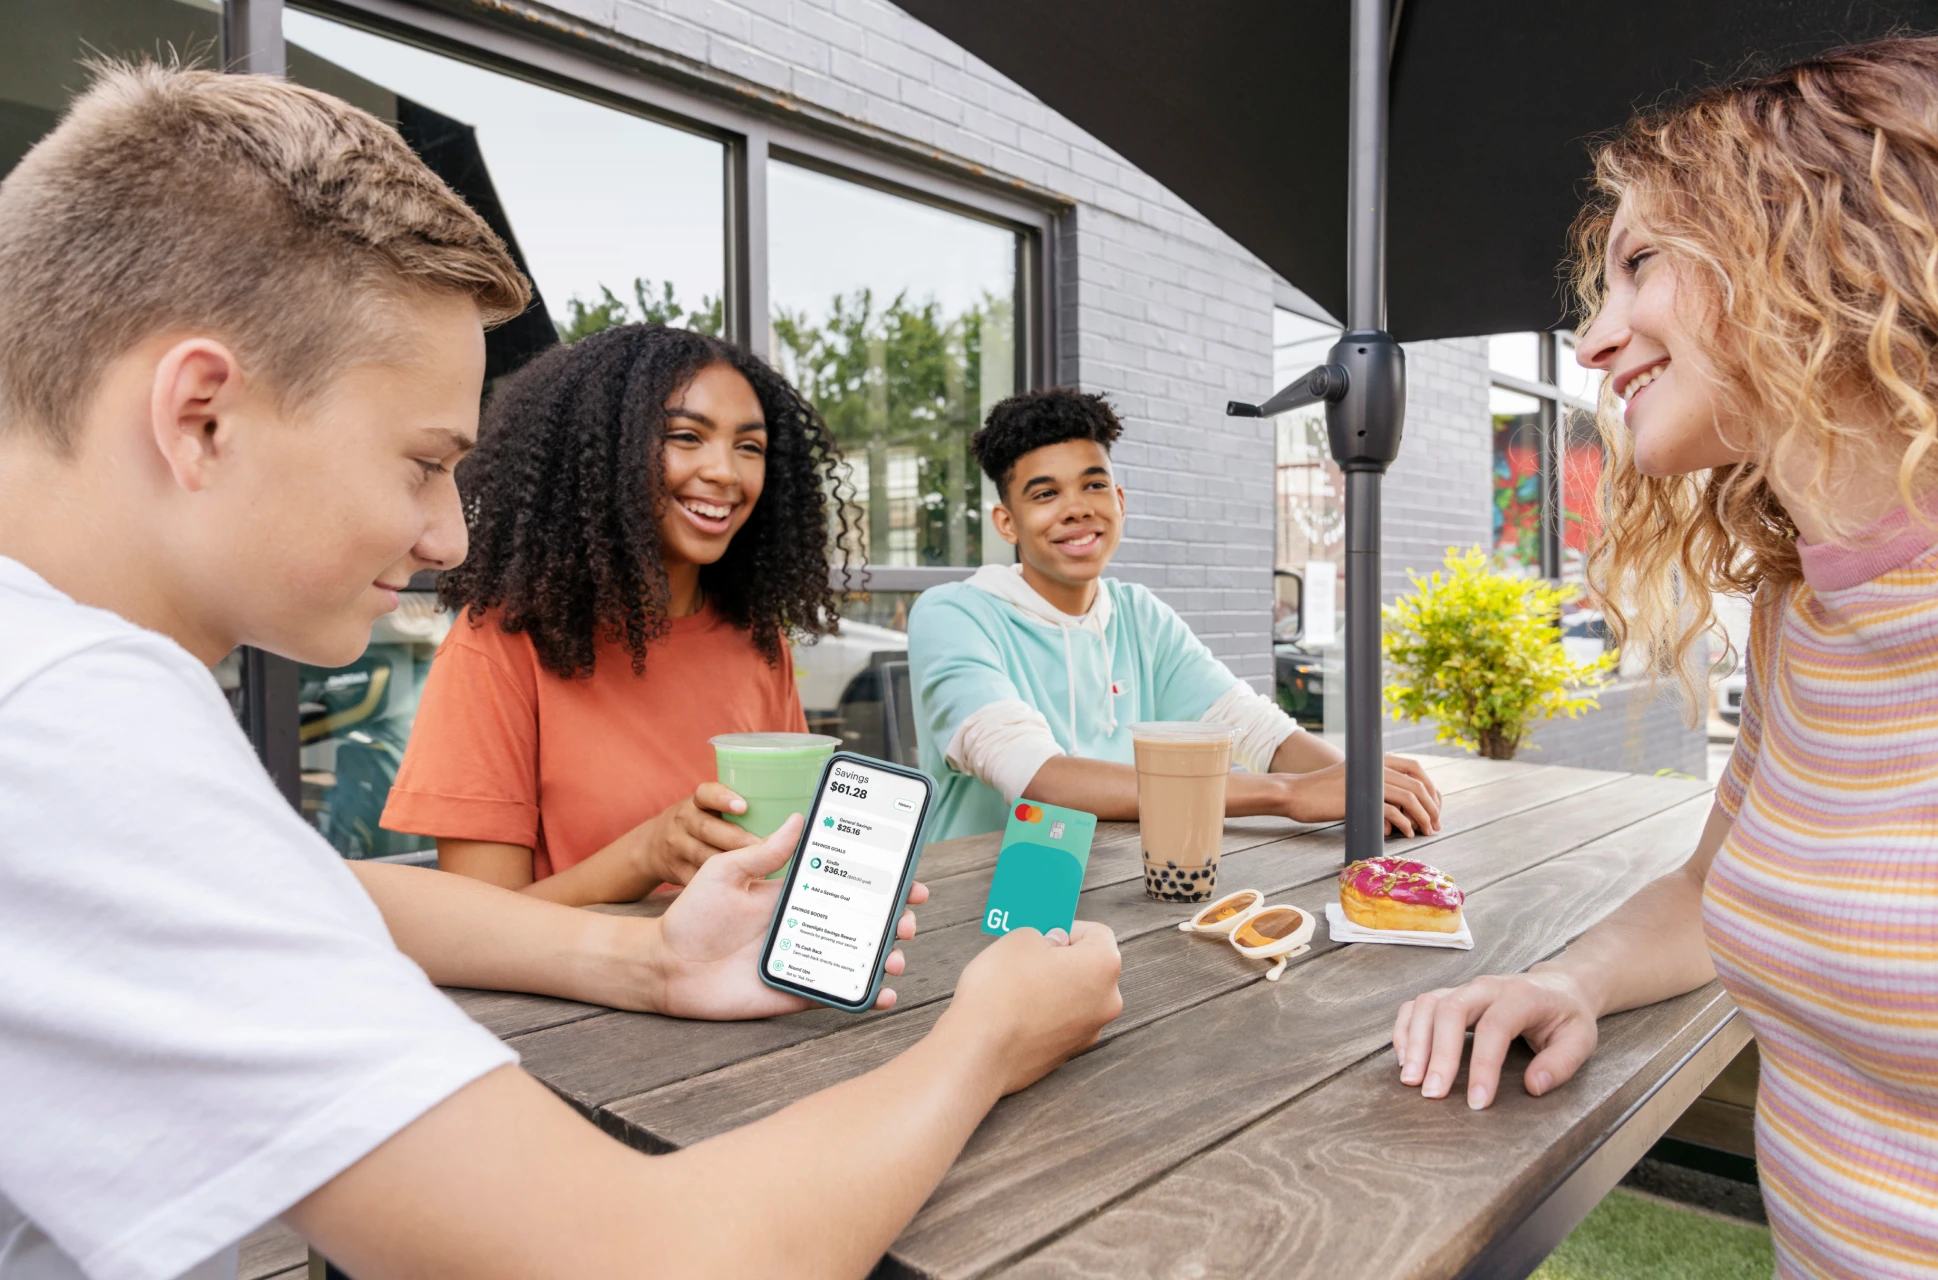 Teens hanging out around an outdoor table discussing their futures with the Greenlight investing app